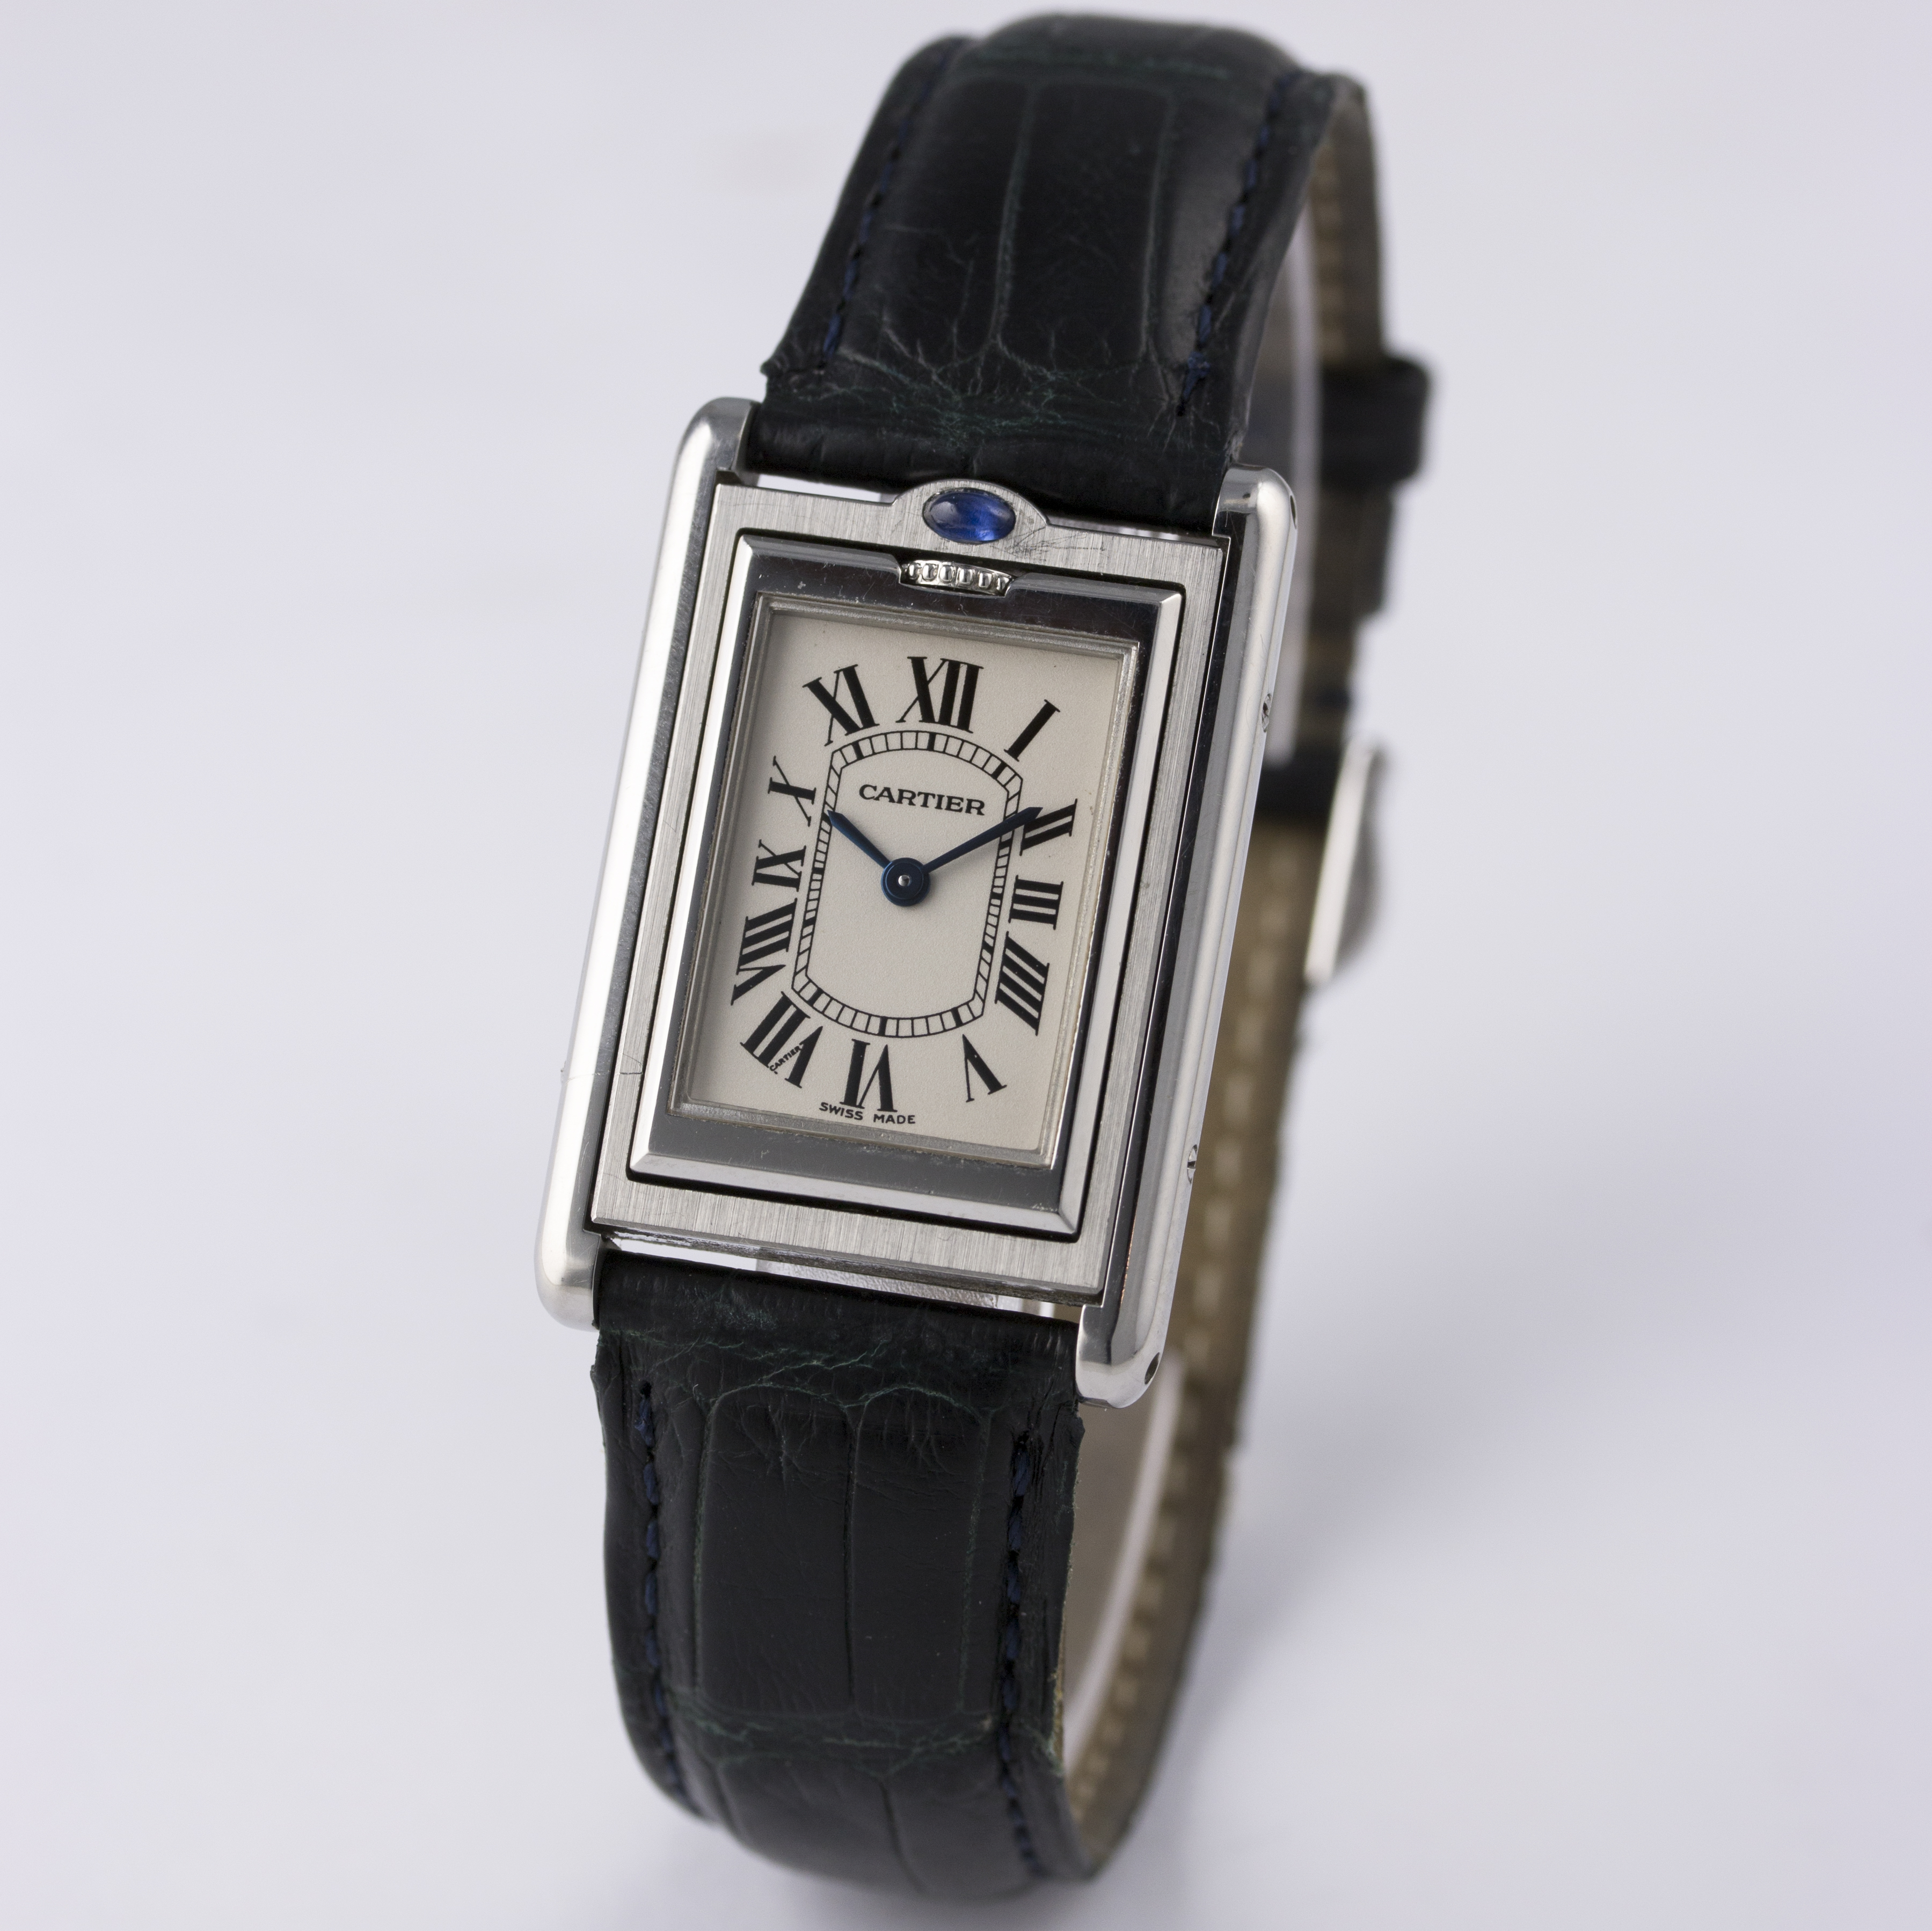 A MID SIZE STAINLESS STEEL CARTIER TANK BASCULANTE WRIST WATCH CIRCA 2002, REF. 2405
D: Silver - Image 2 of 8